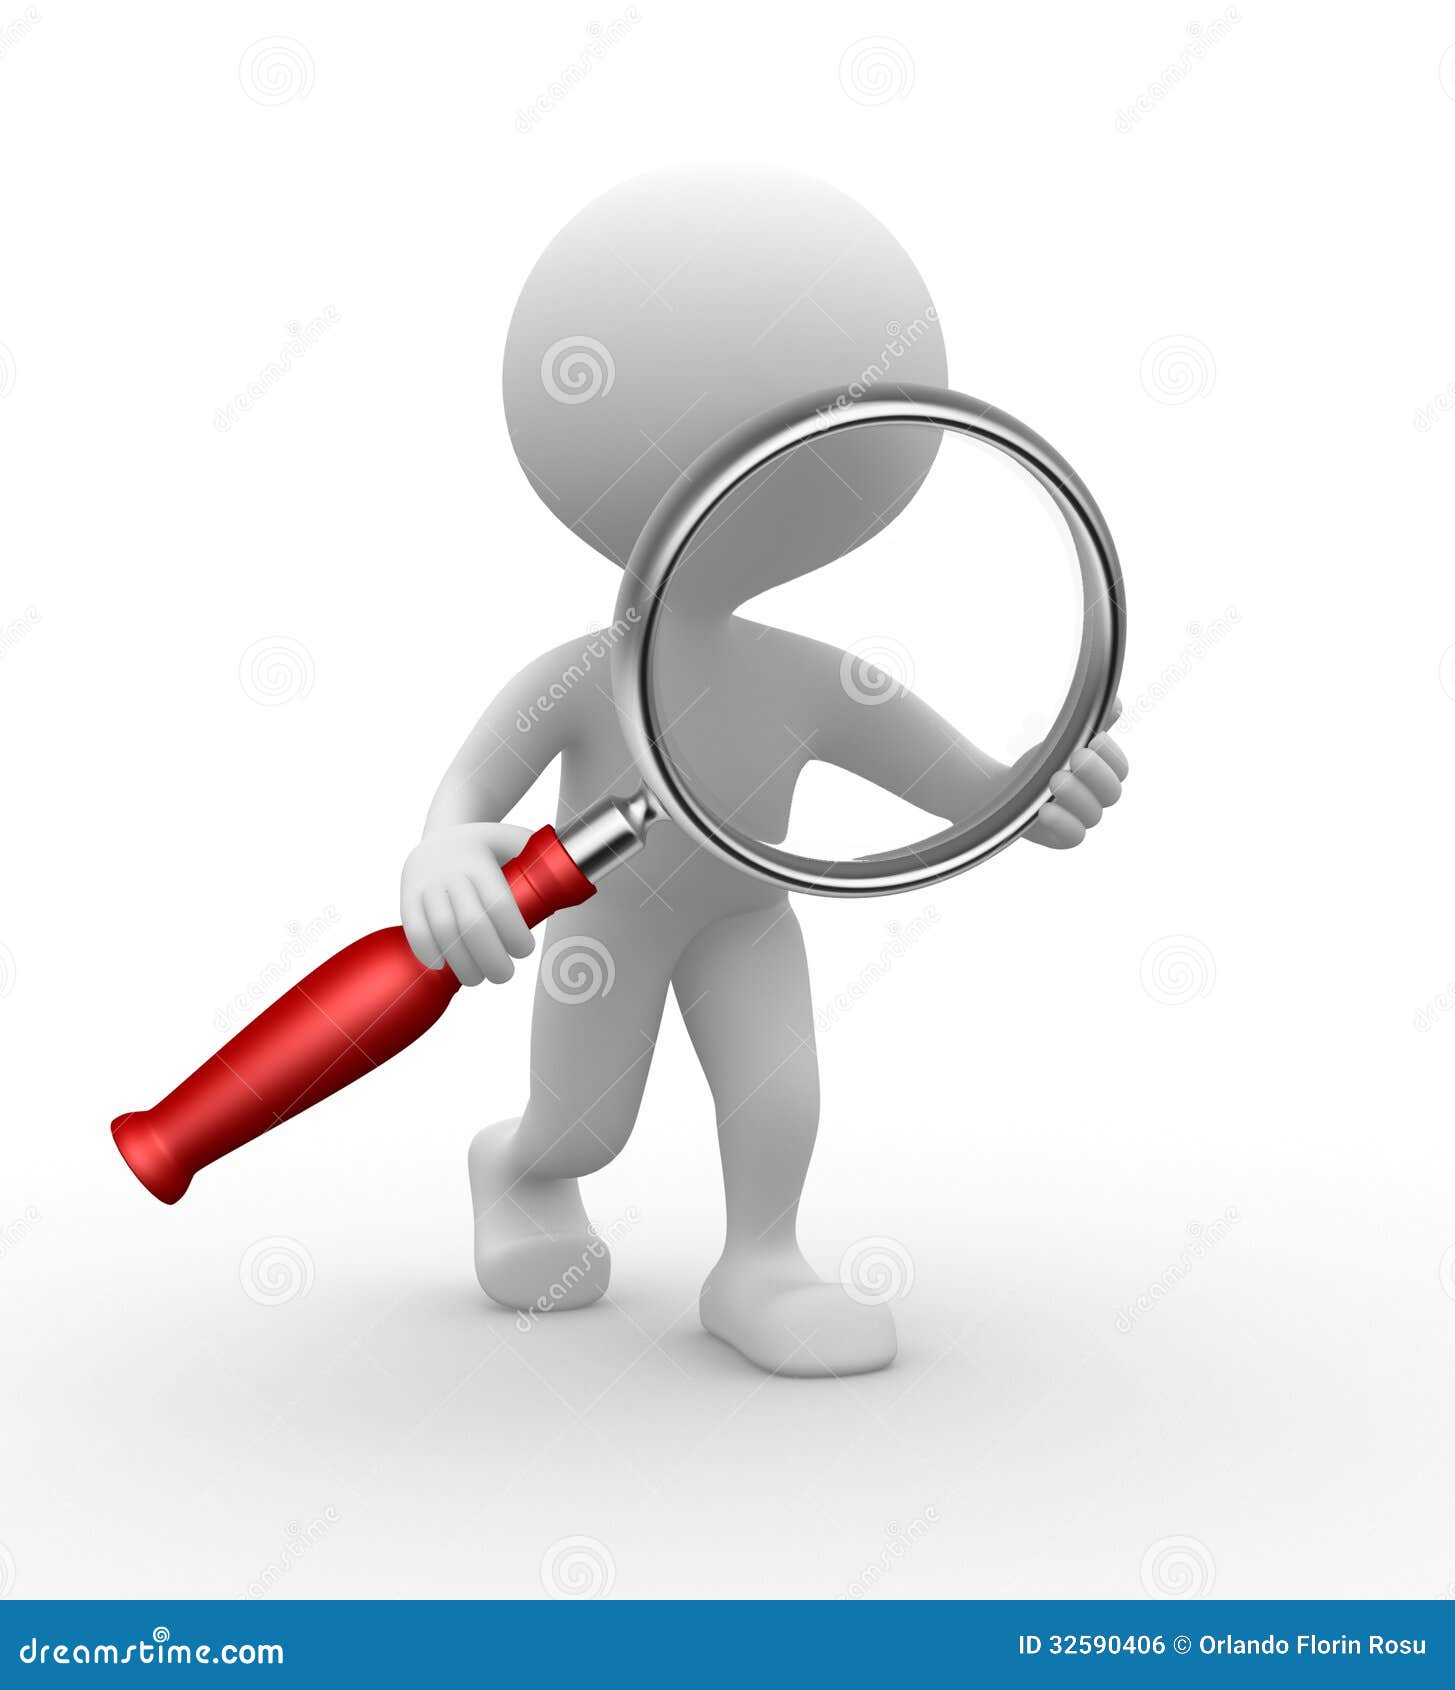 clipart man with magnifying glass - photo #25